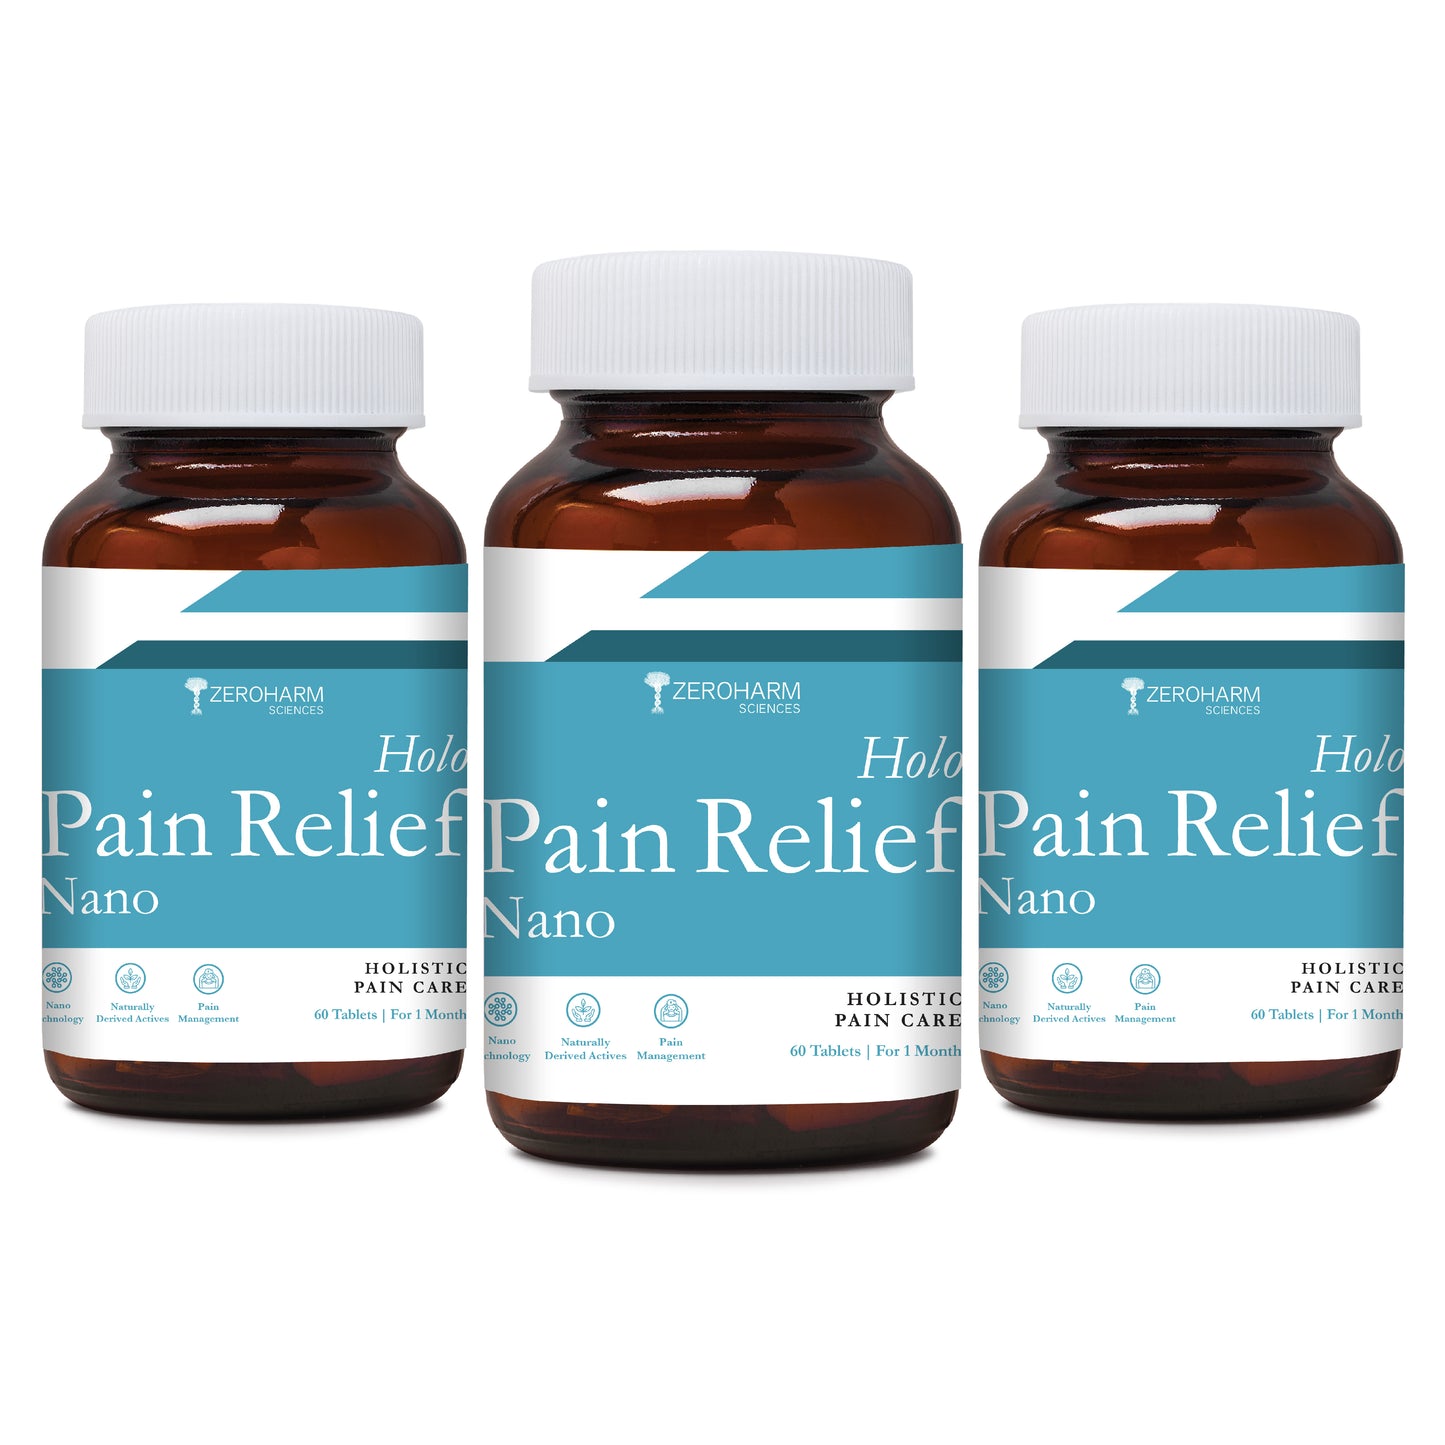 Holo Pain Relief